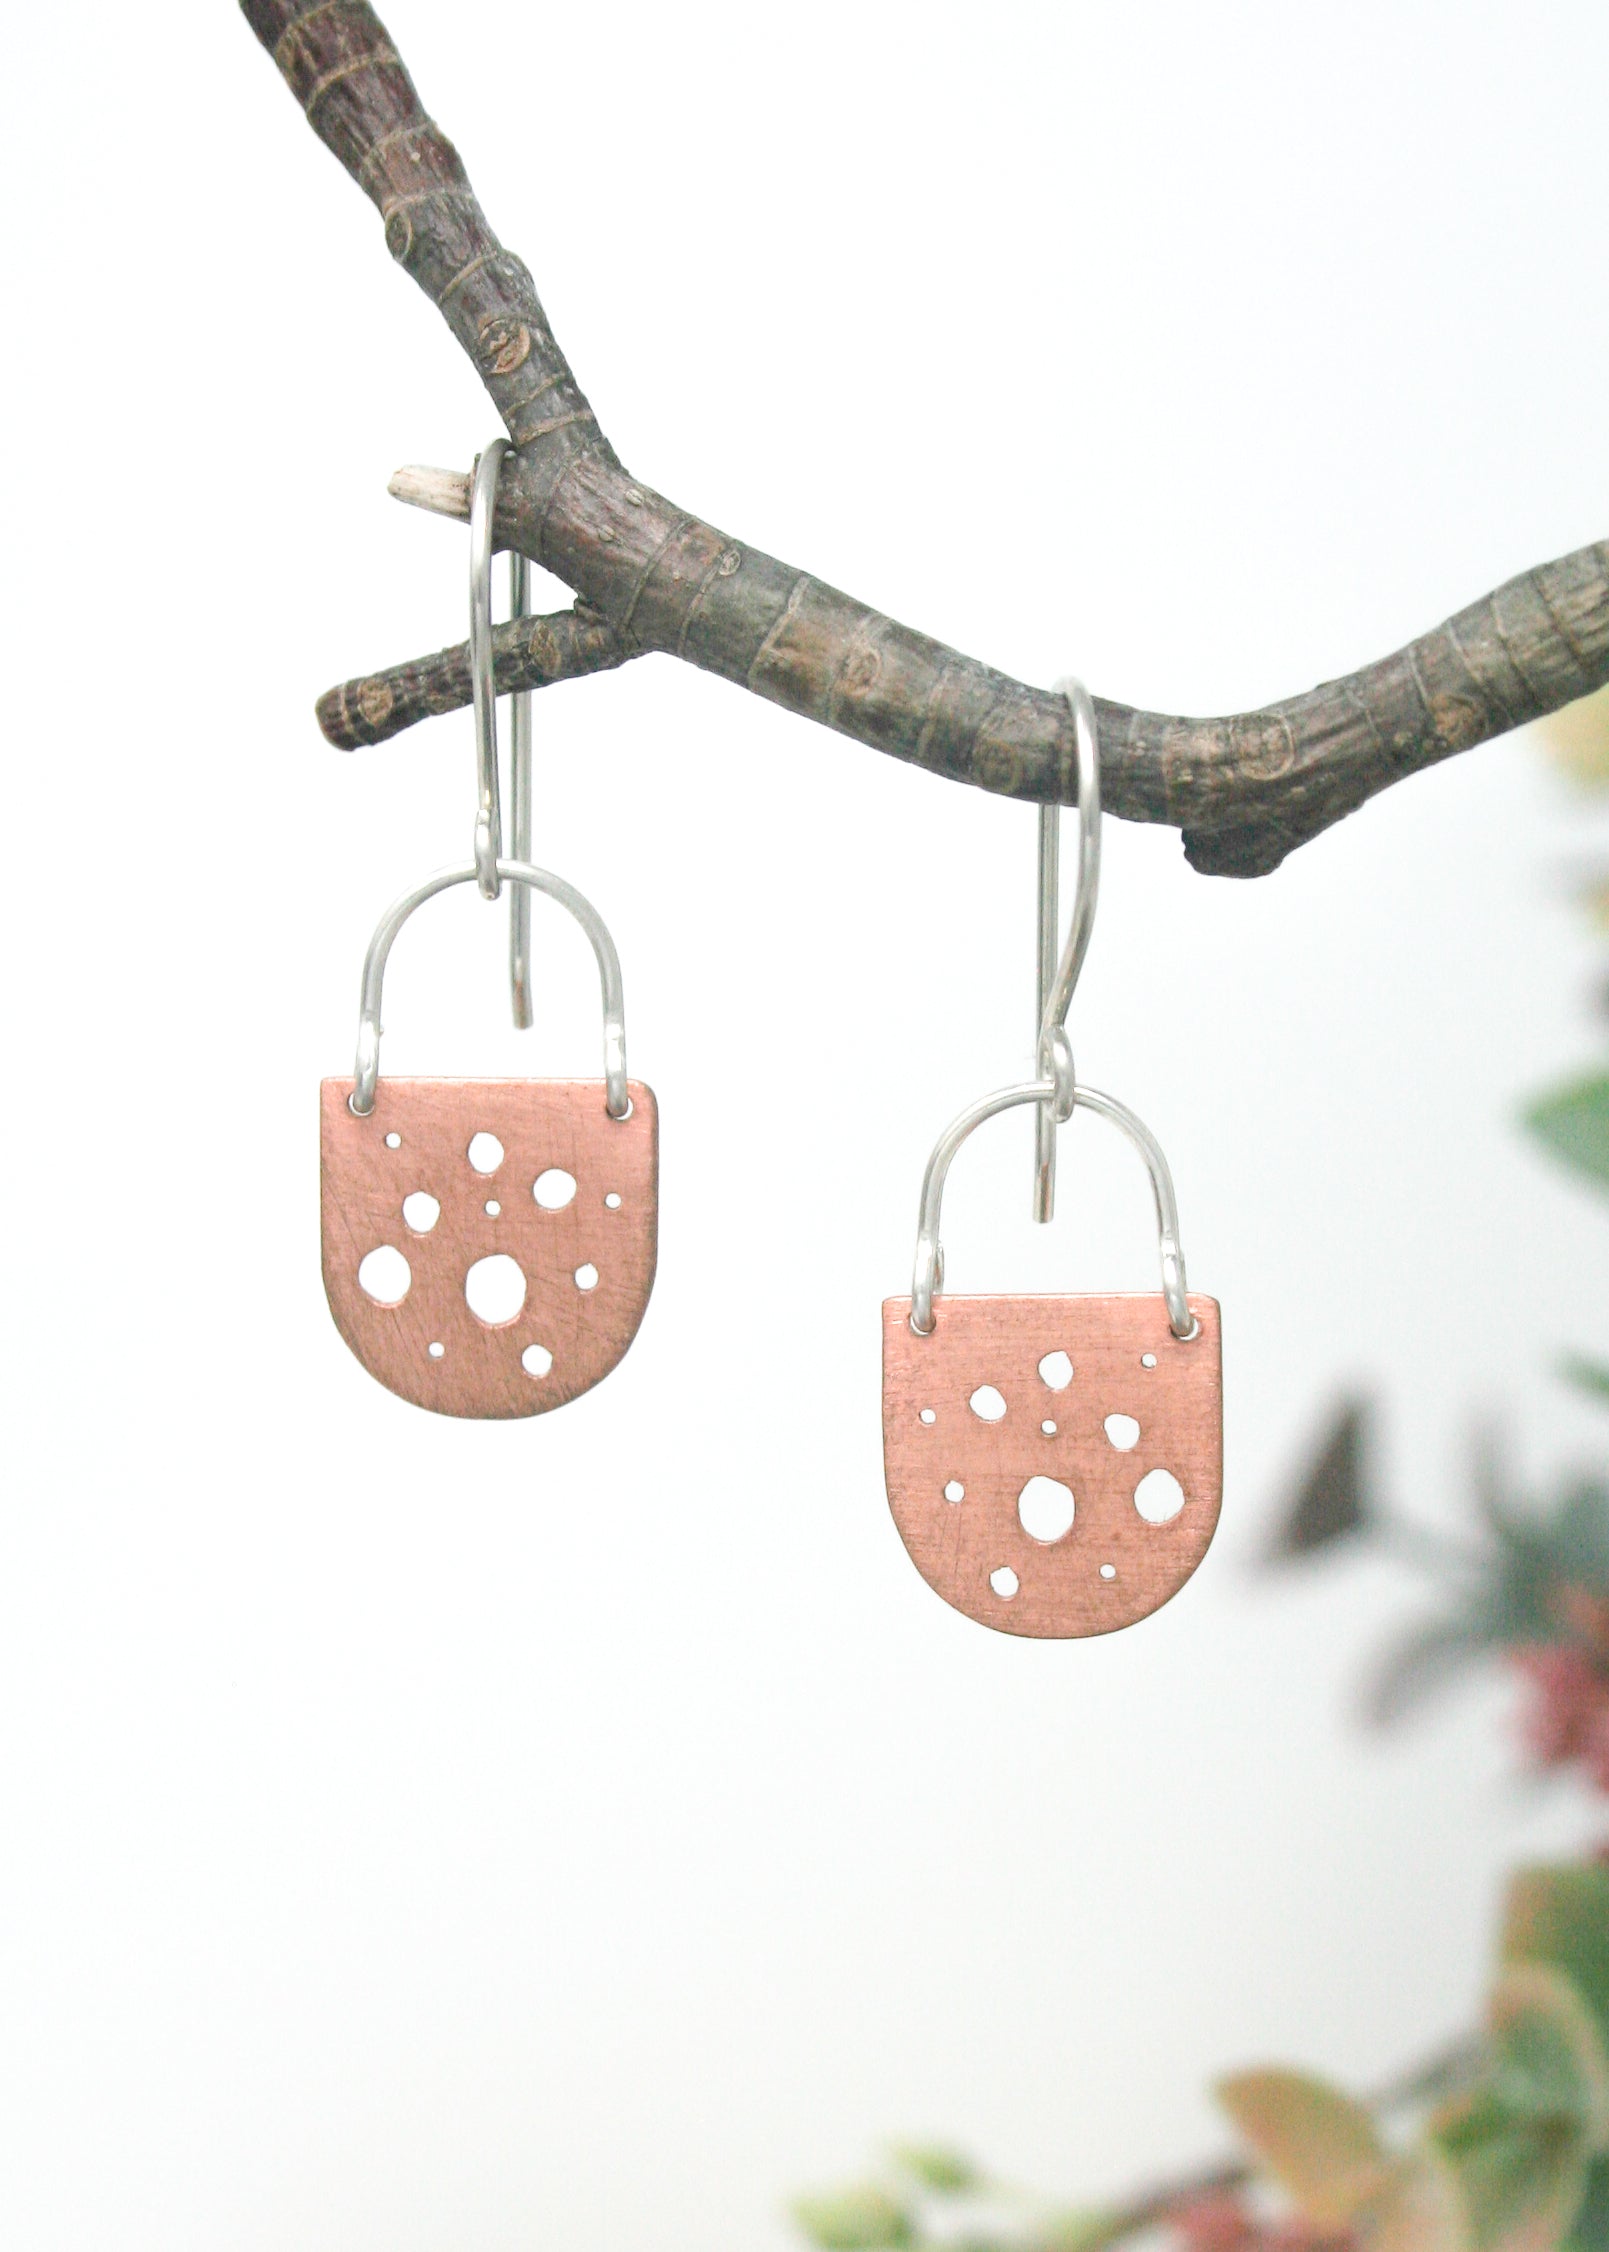 a pair of earrings hanging from a tree branch